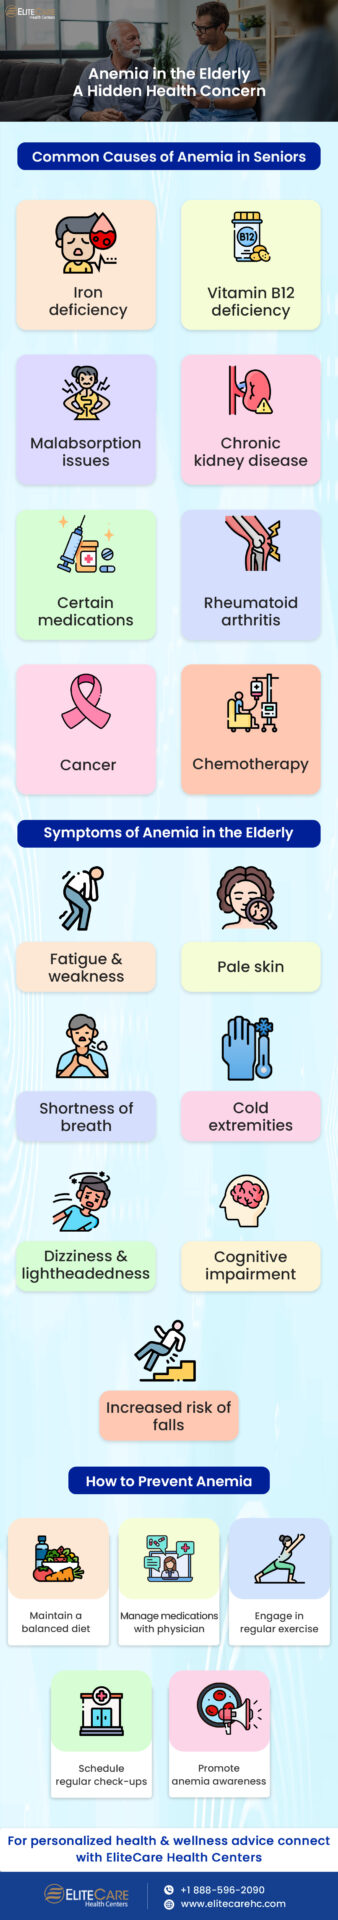 Anemia in the Elderly a Hidden Health Connection | Infographic